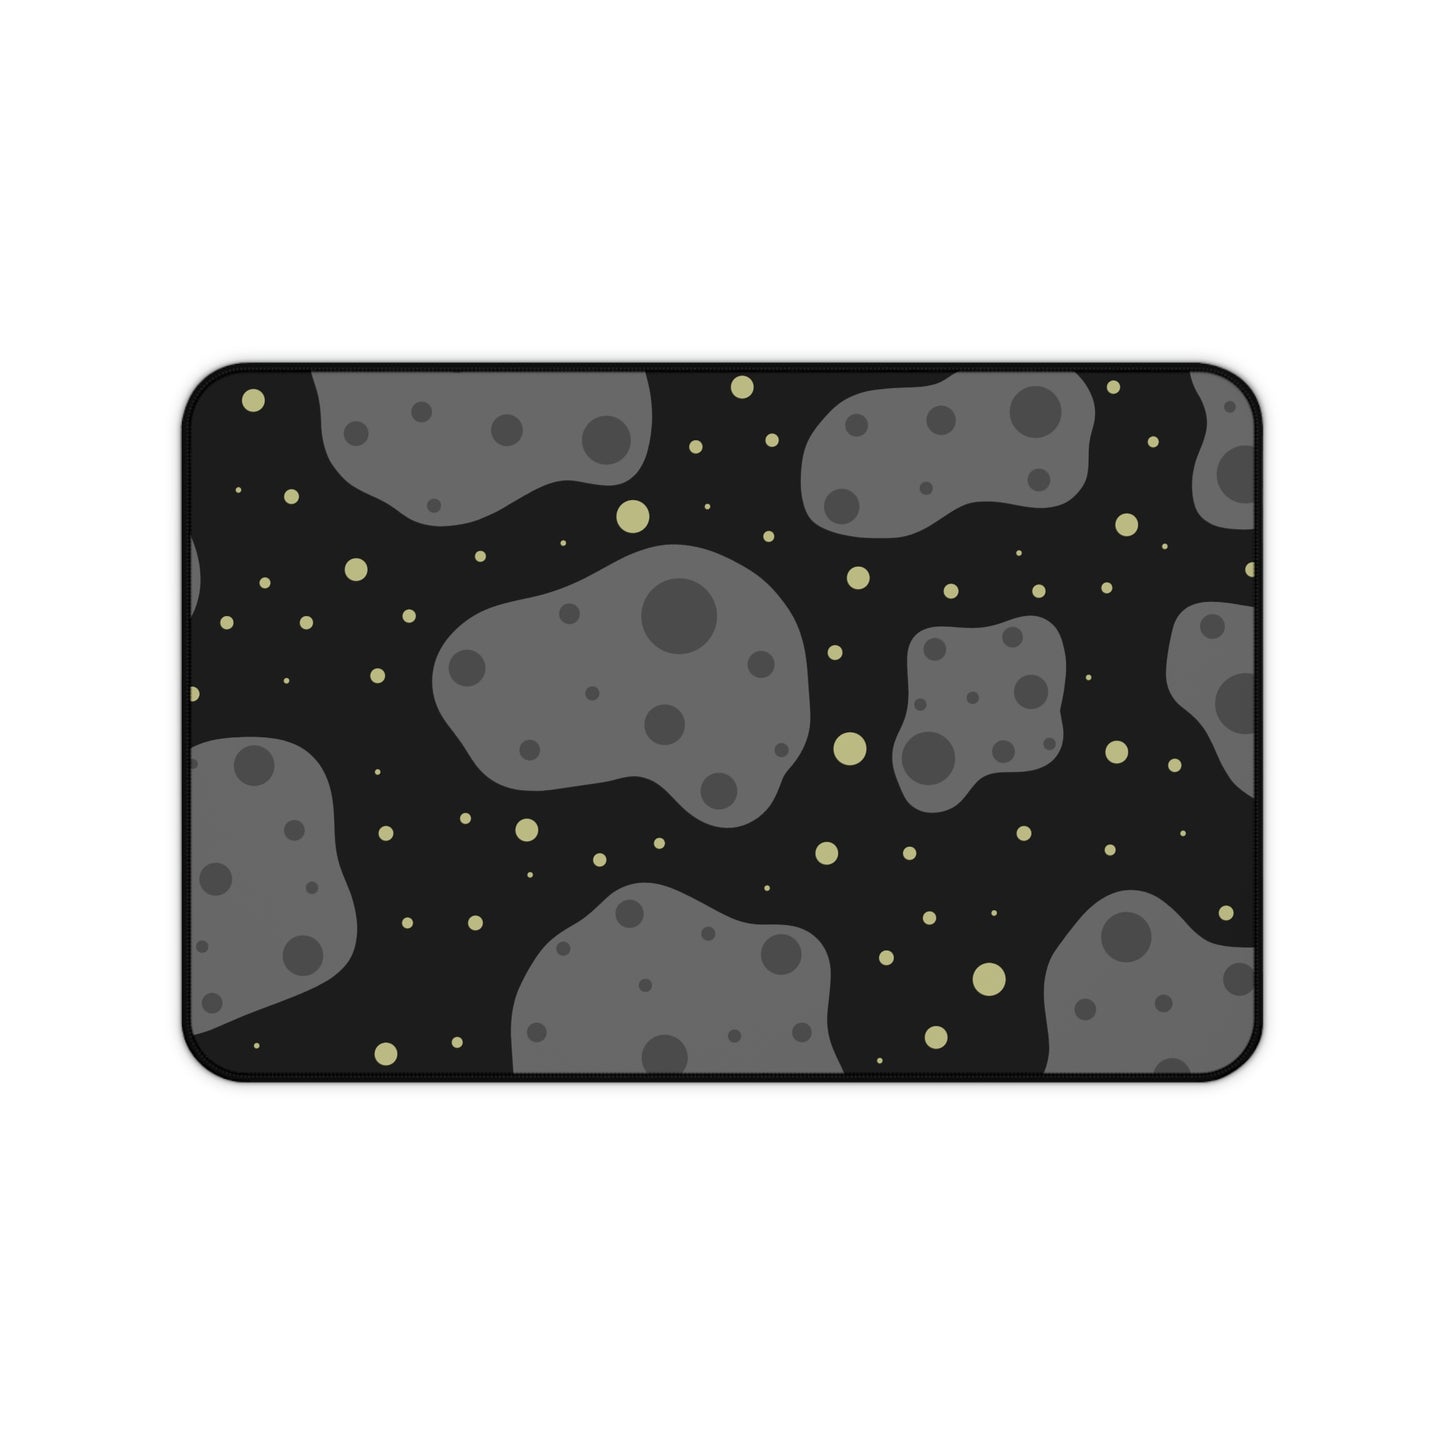 A 12" x 18" desk mat with a black background, gray asteroids, and yellow stars.